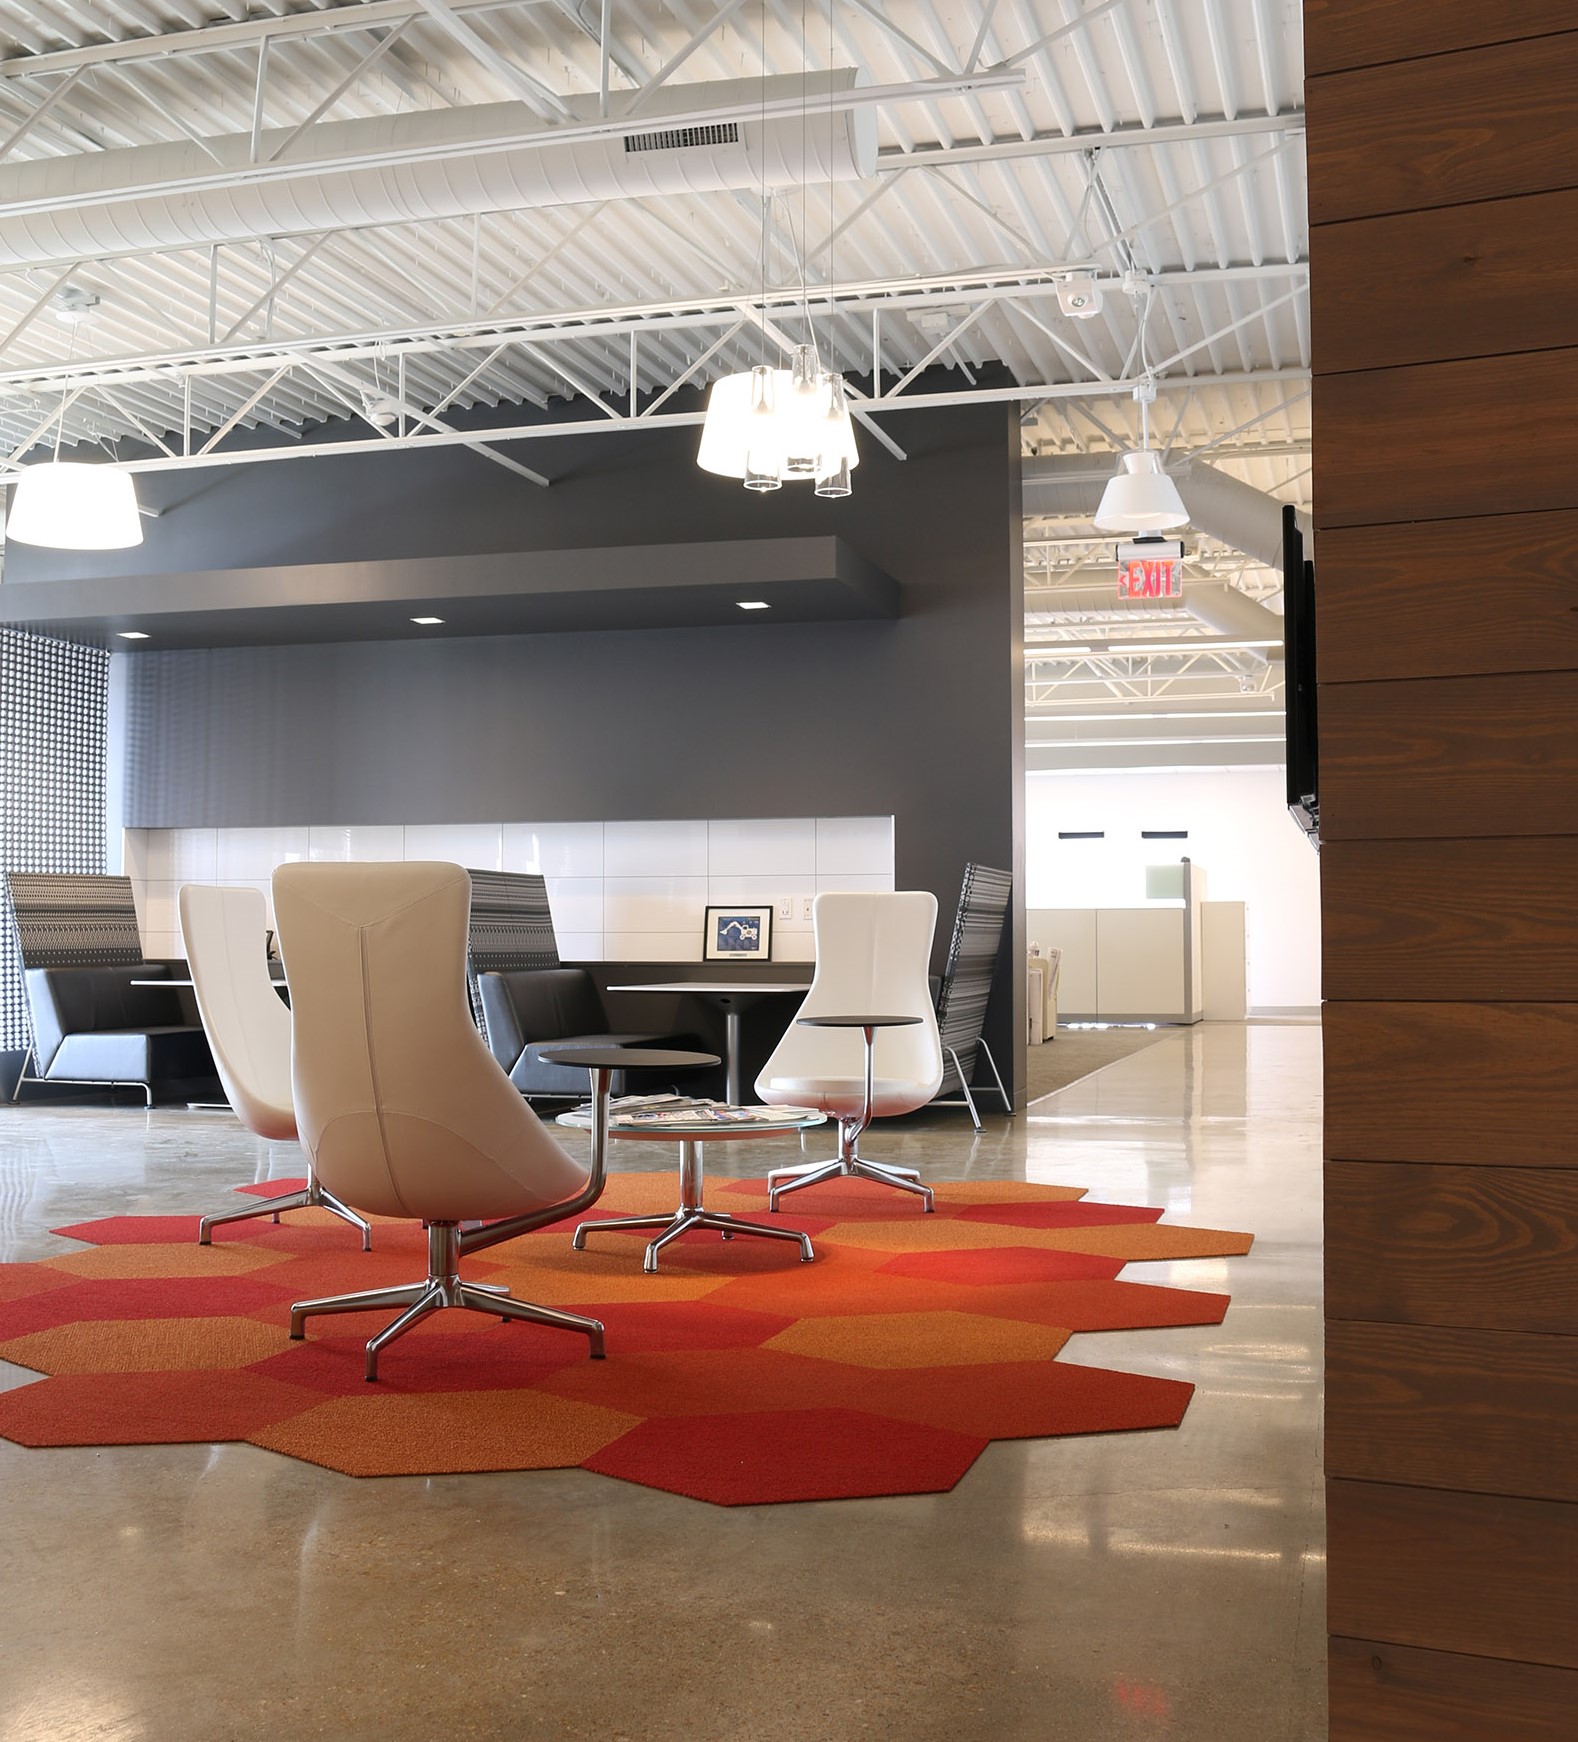 KAI Experts Say COVID-19 Pandemic Causing Major Shift in Traditional Office Design and Function